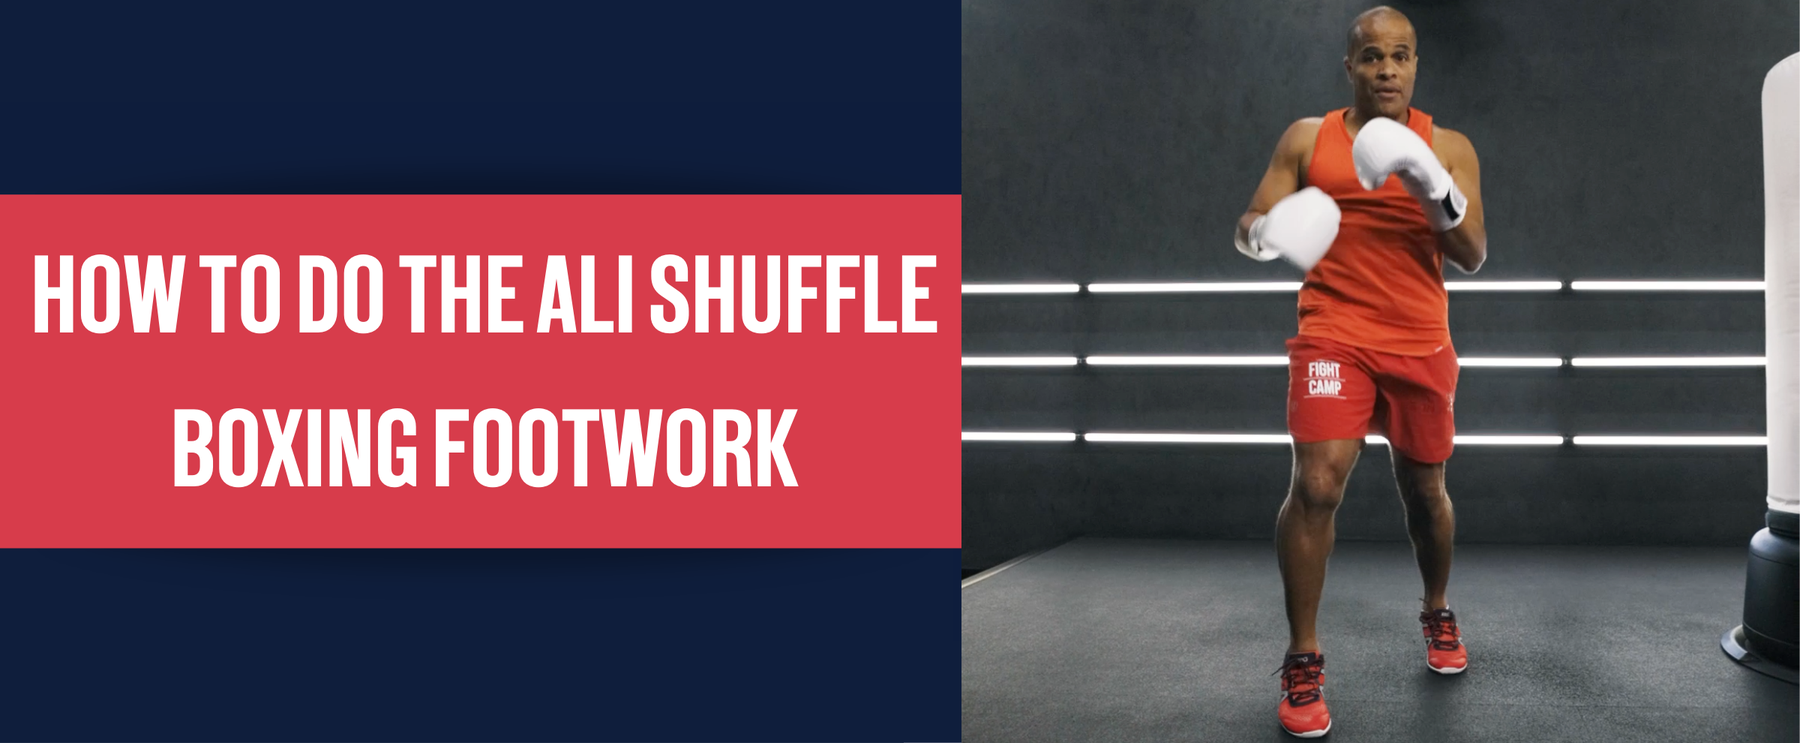 How To Do The Ali Shuffle | Boxing Footwork